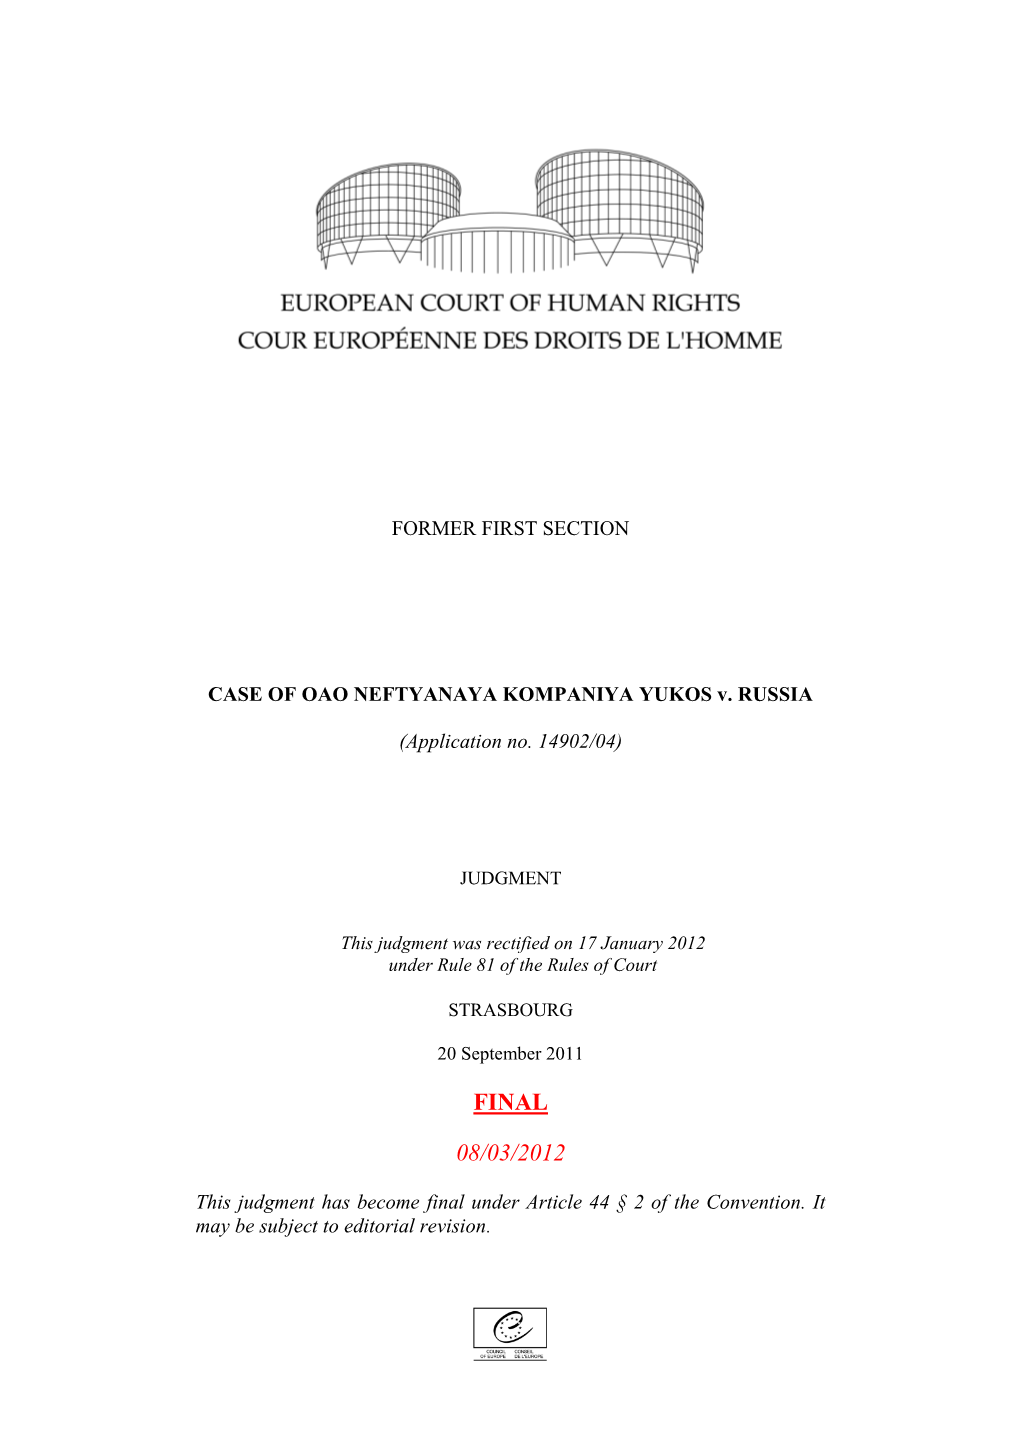 Judgment of the European Court of Human Rights on the Merits